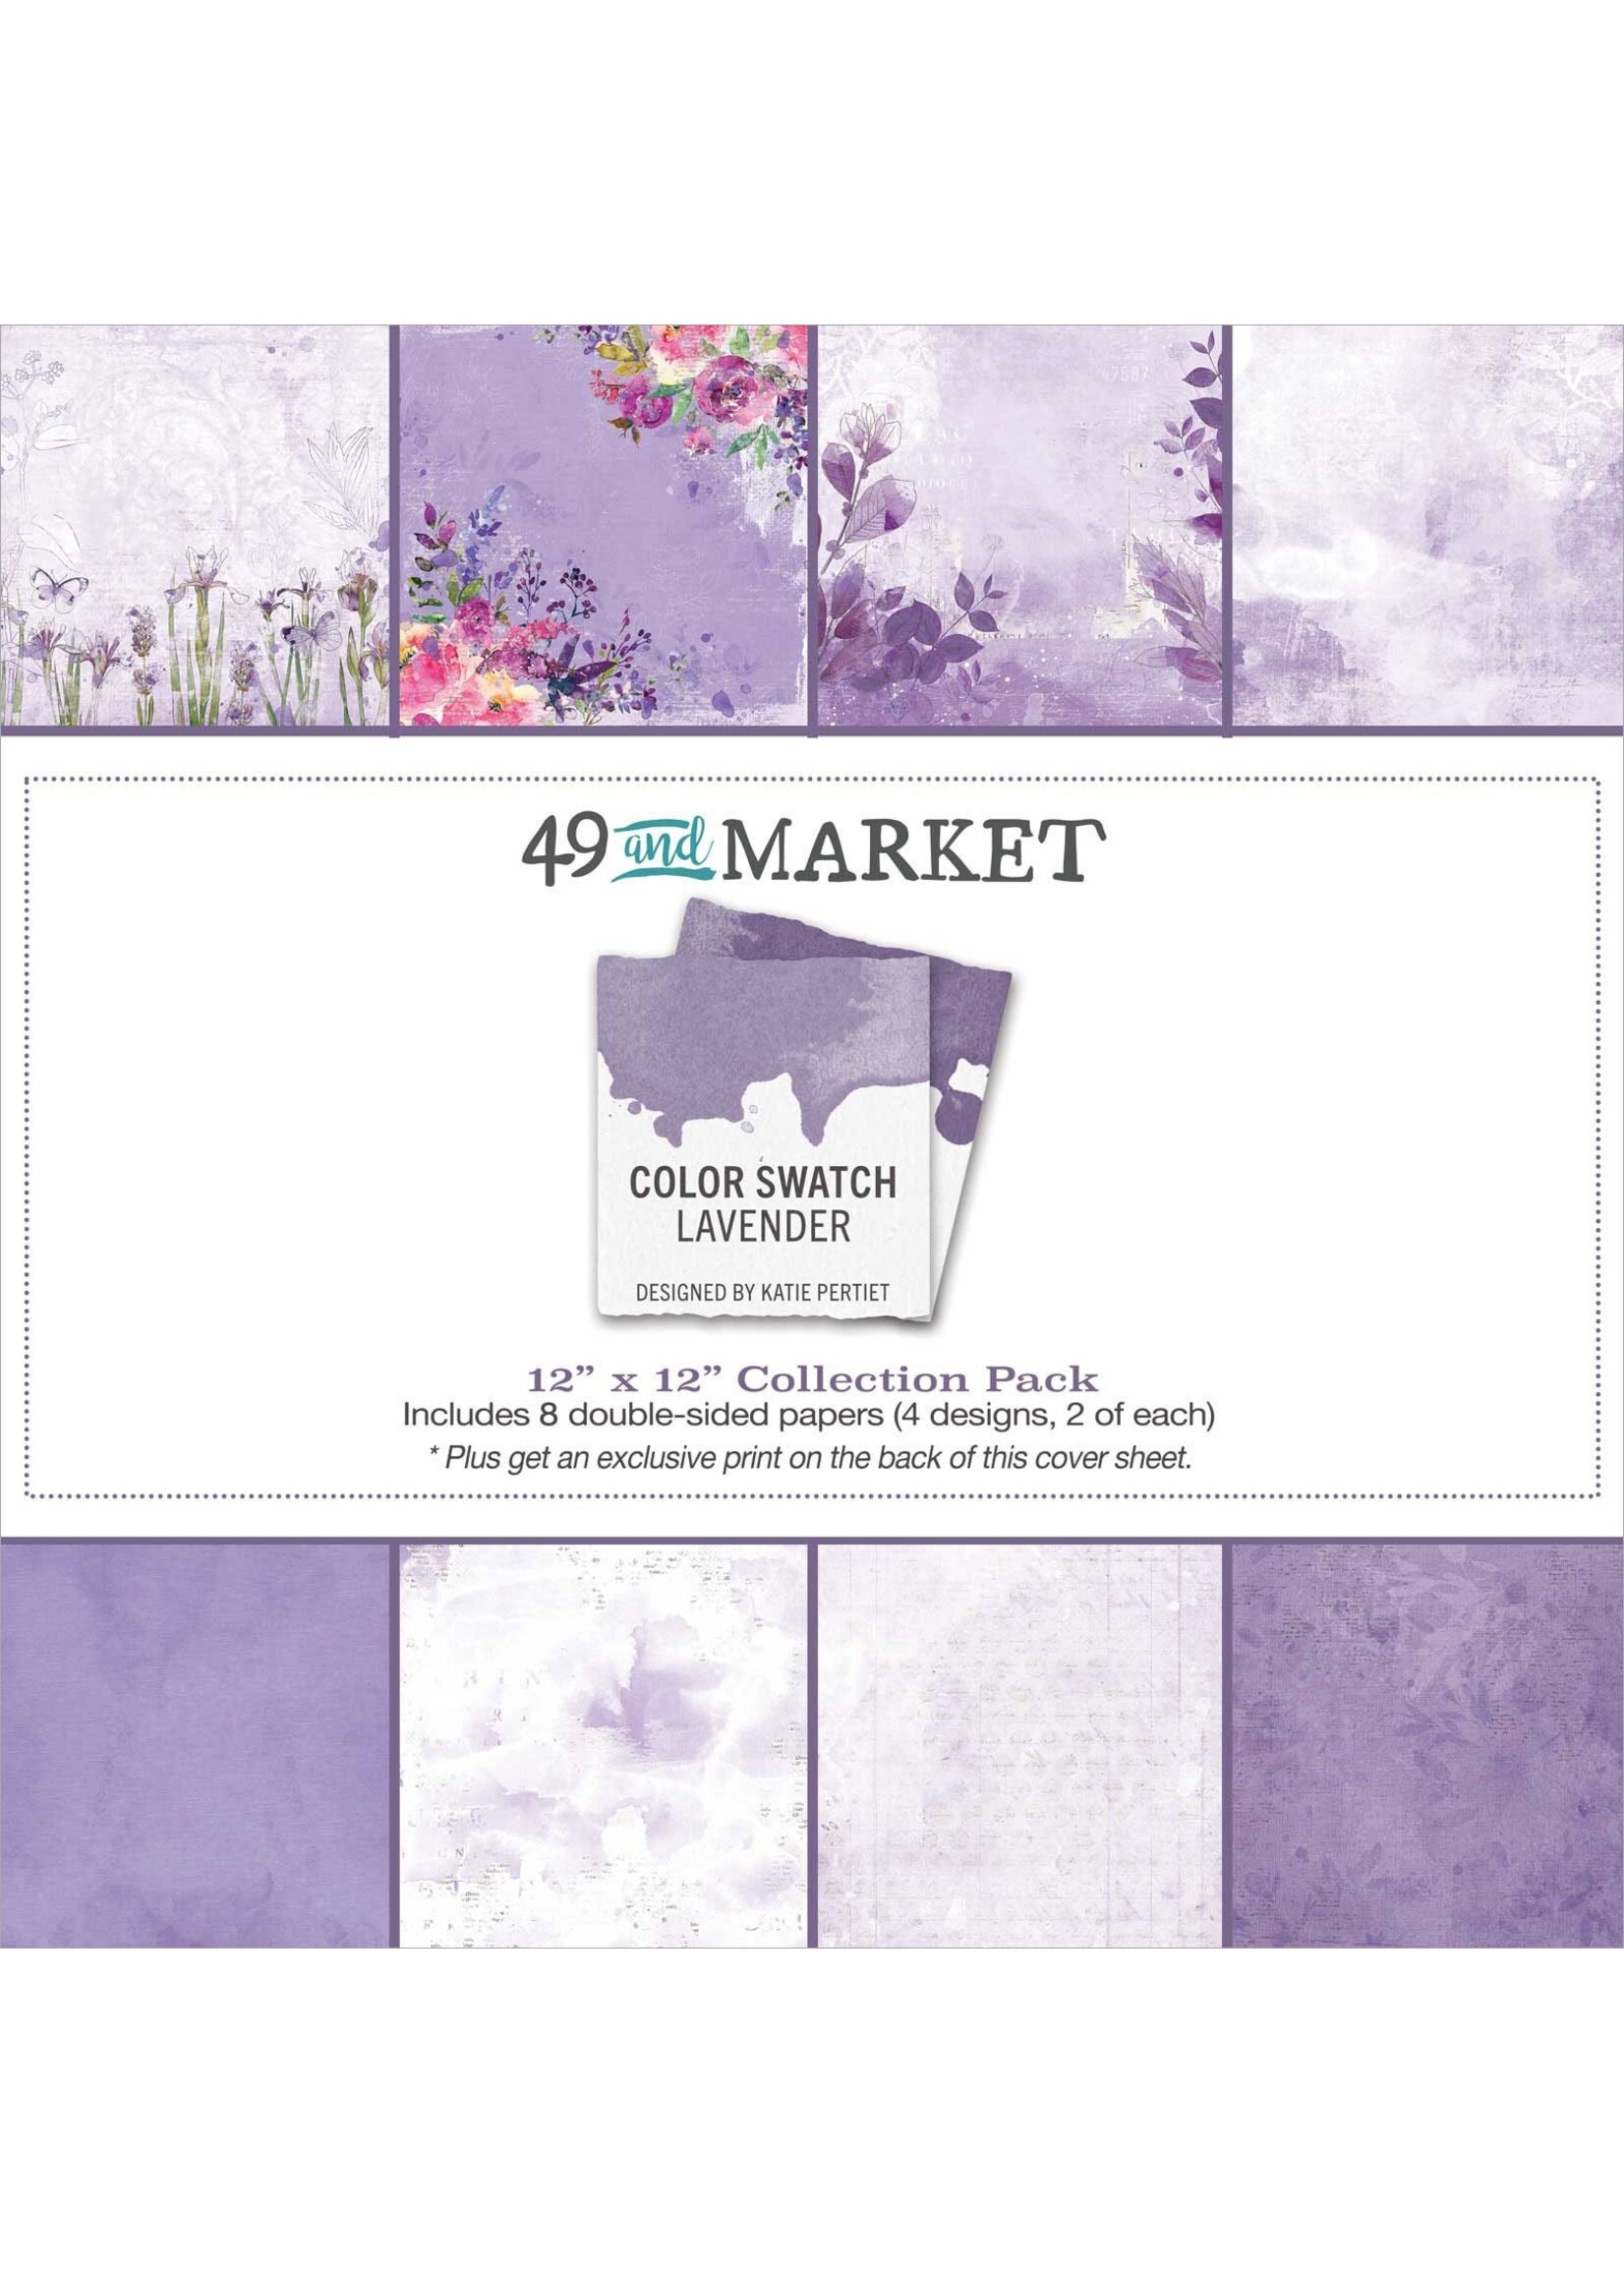 49 and Market Color Swatch Lavender: 12X12 Collection Pack